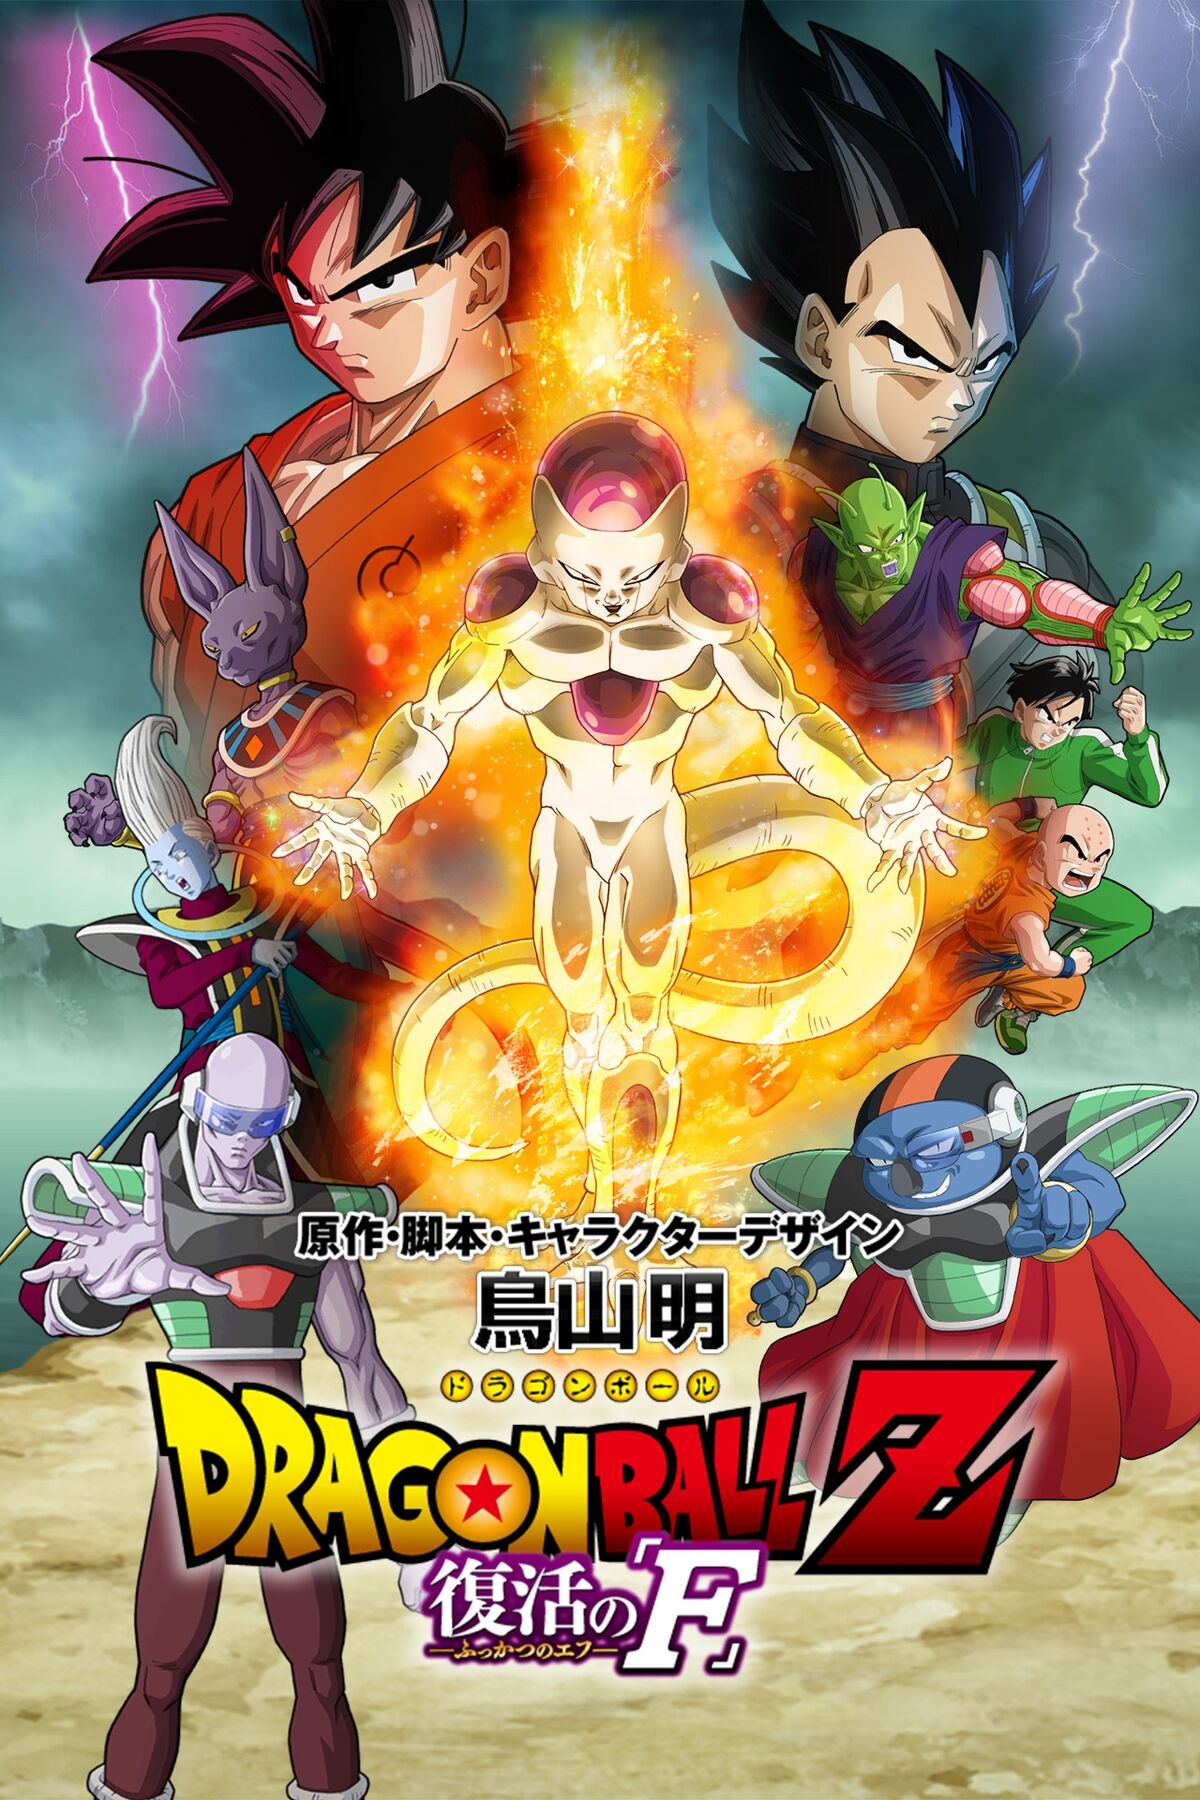 Official On-Going Dragon Ball Super Movie #2 Thread: Super Hero